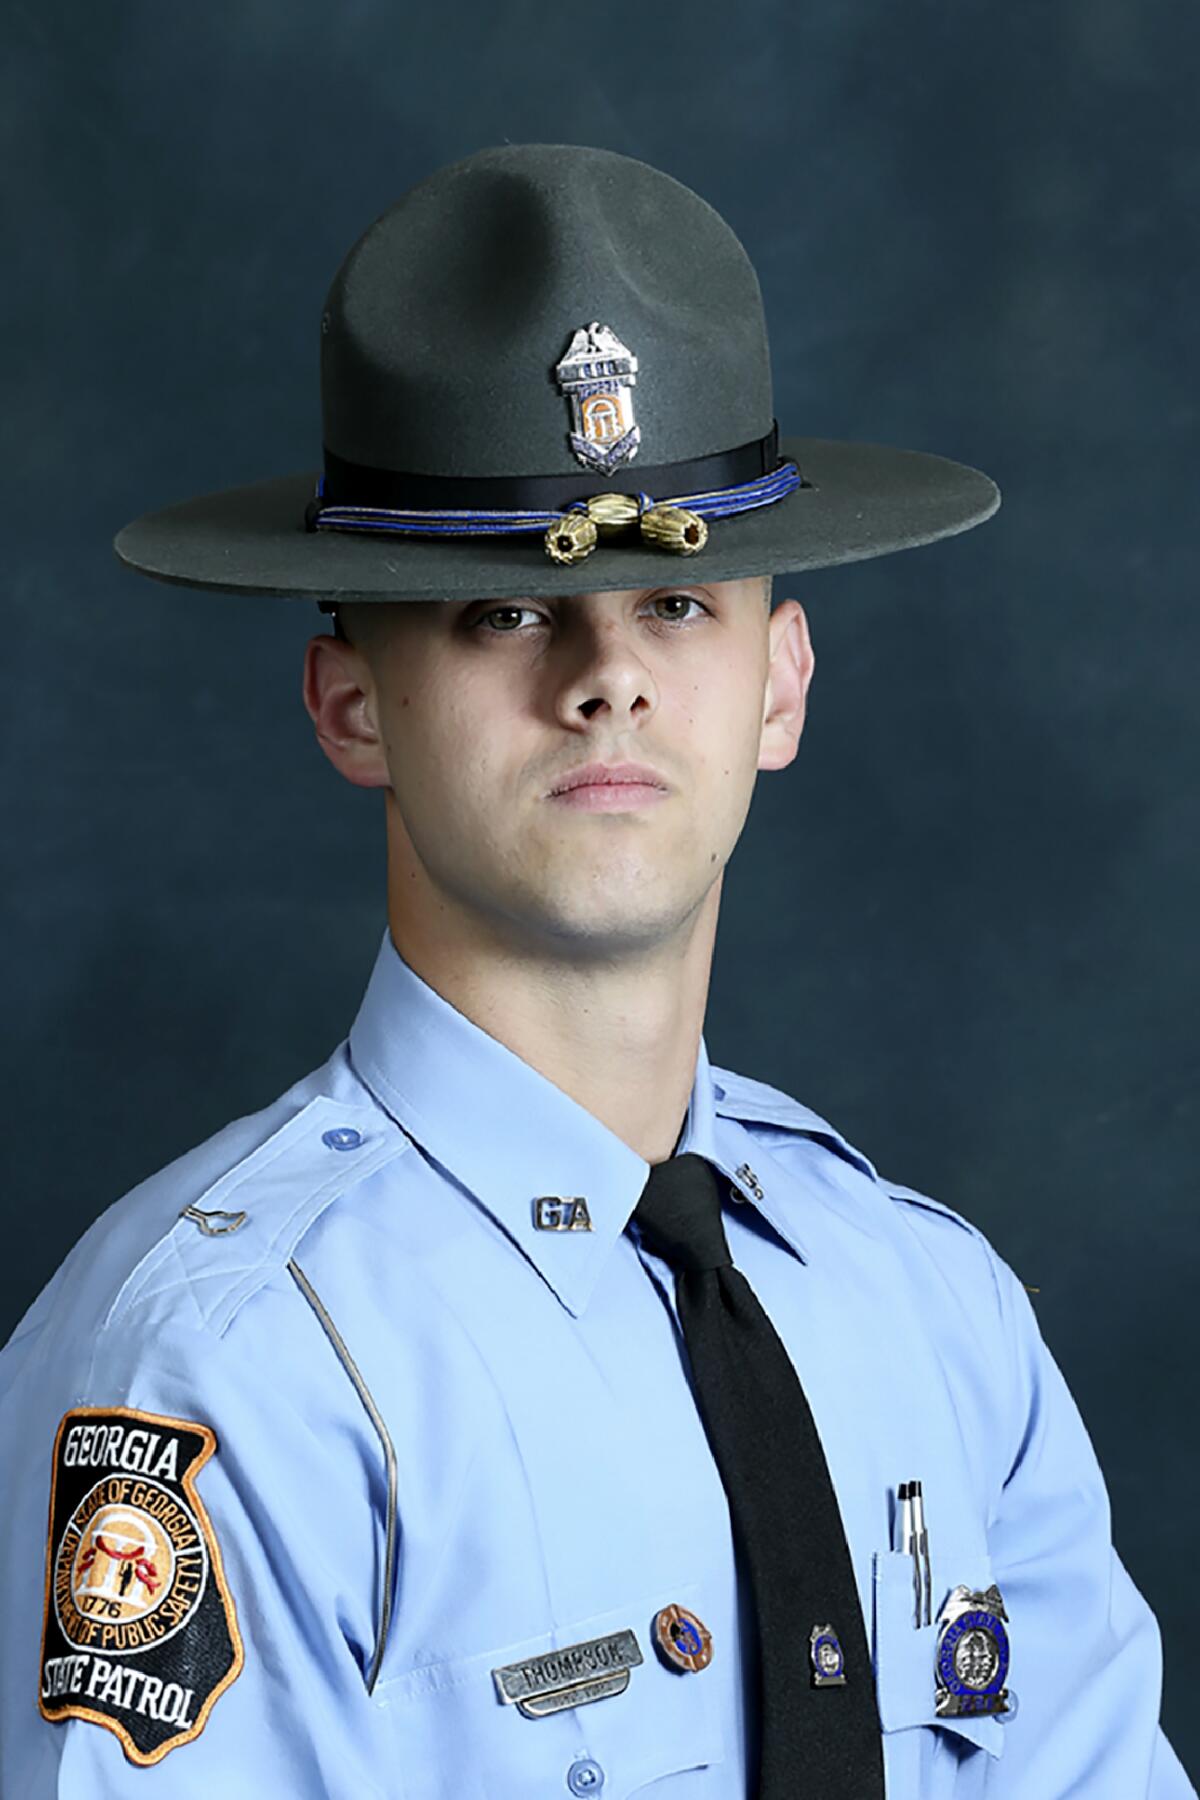 FILE - In this undated photo provided by the Georgia Department of Public Safety, state trooper Jacob Gordon Thompson is seen in an official portrait. The office of Georgia's attorney general confirmed Friday, April 1, 2022, that the state of Georgia has agreed to pay a $4.8 million legal settlement to the family of a Black man who was fatally shot by the trooper trying to pull him over for a broke tail light. Thompson was fired and charged with murder following the 2020 killing, but the prosecution stalled when a grand jury declined to indict him. (Georgia Department of Public Safety via AP, File)